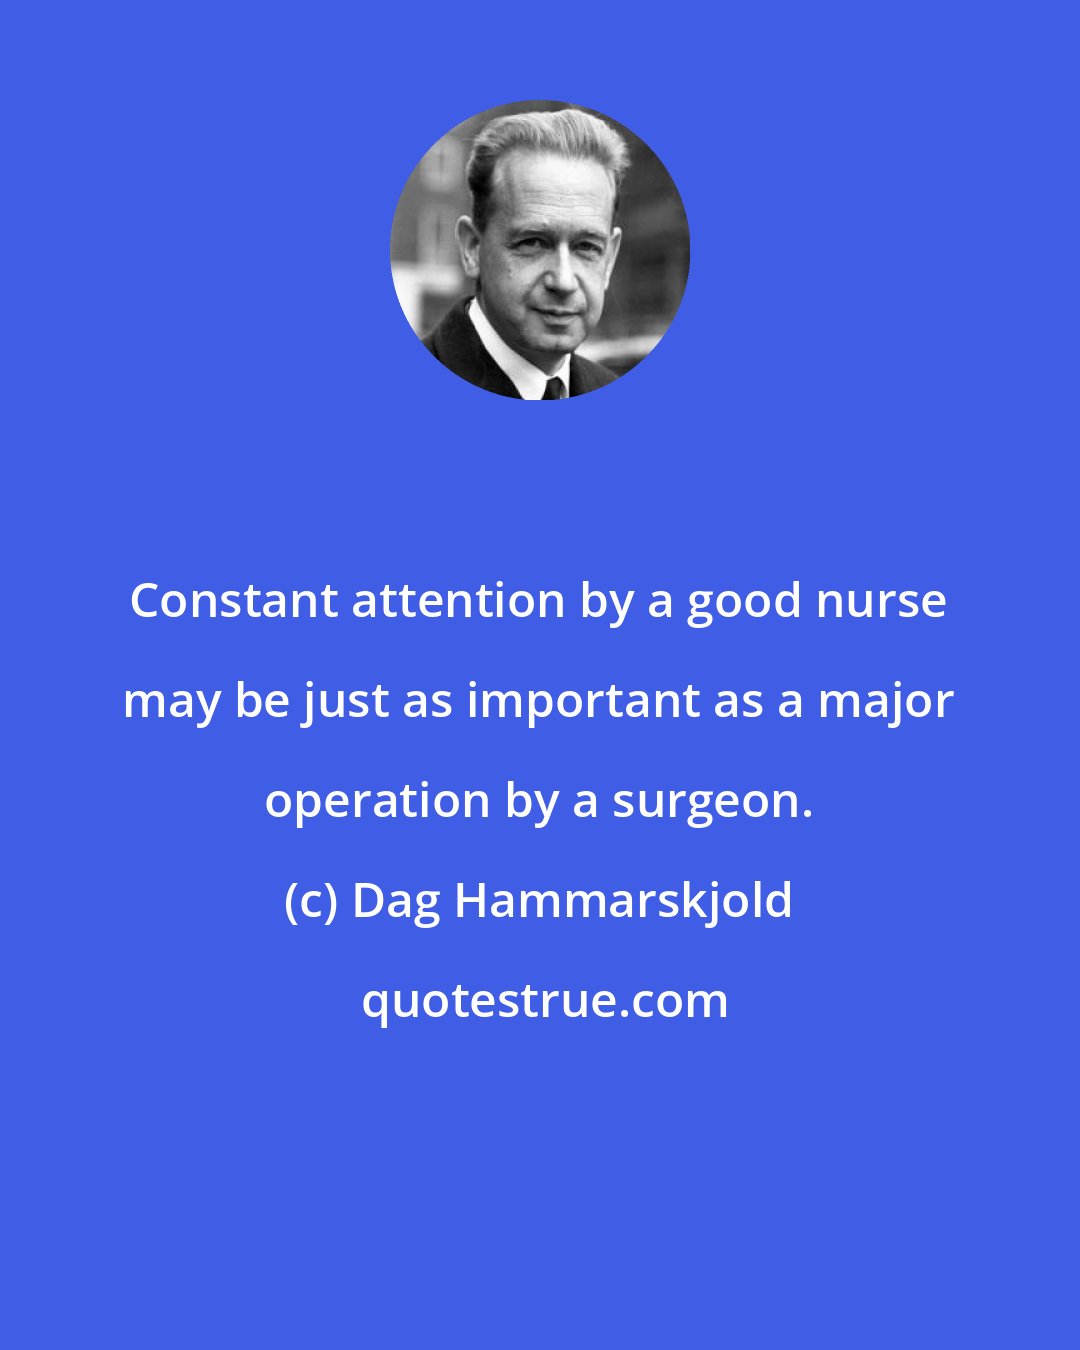 Dag Hammarskjold: Constant attention by a good nurse may be just as important as a major operation by a surgeon.